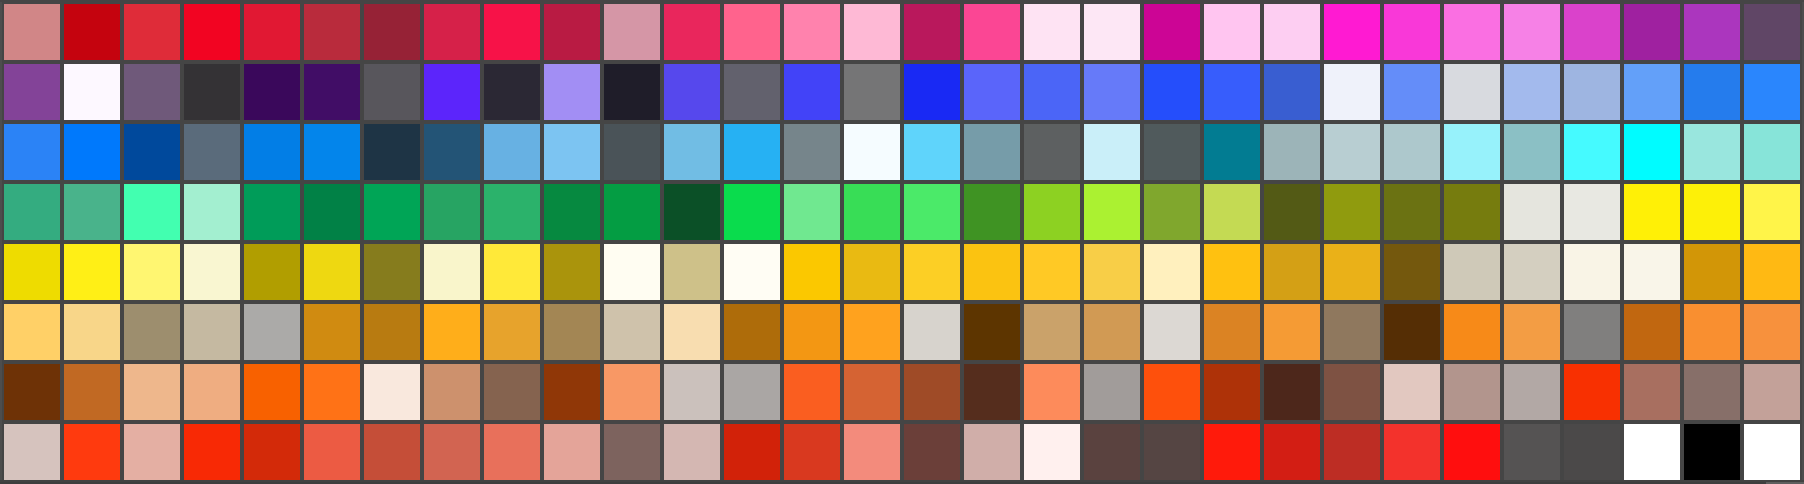 official_palette.png